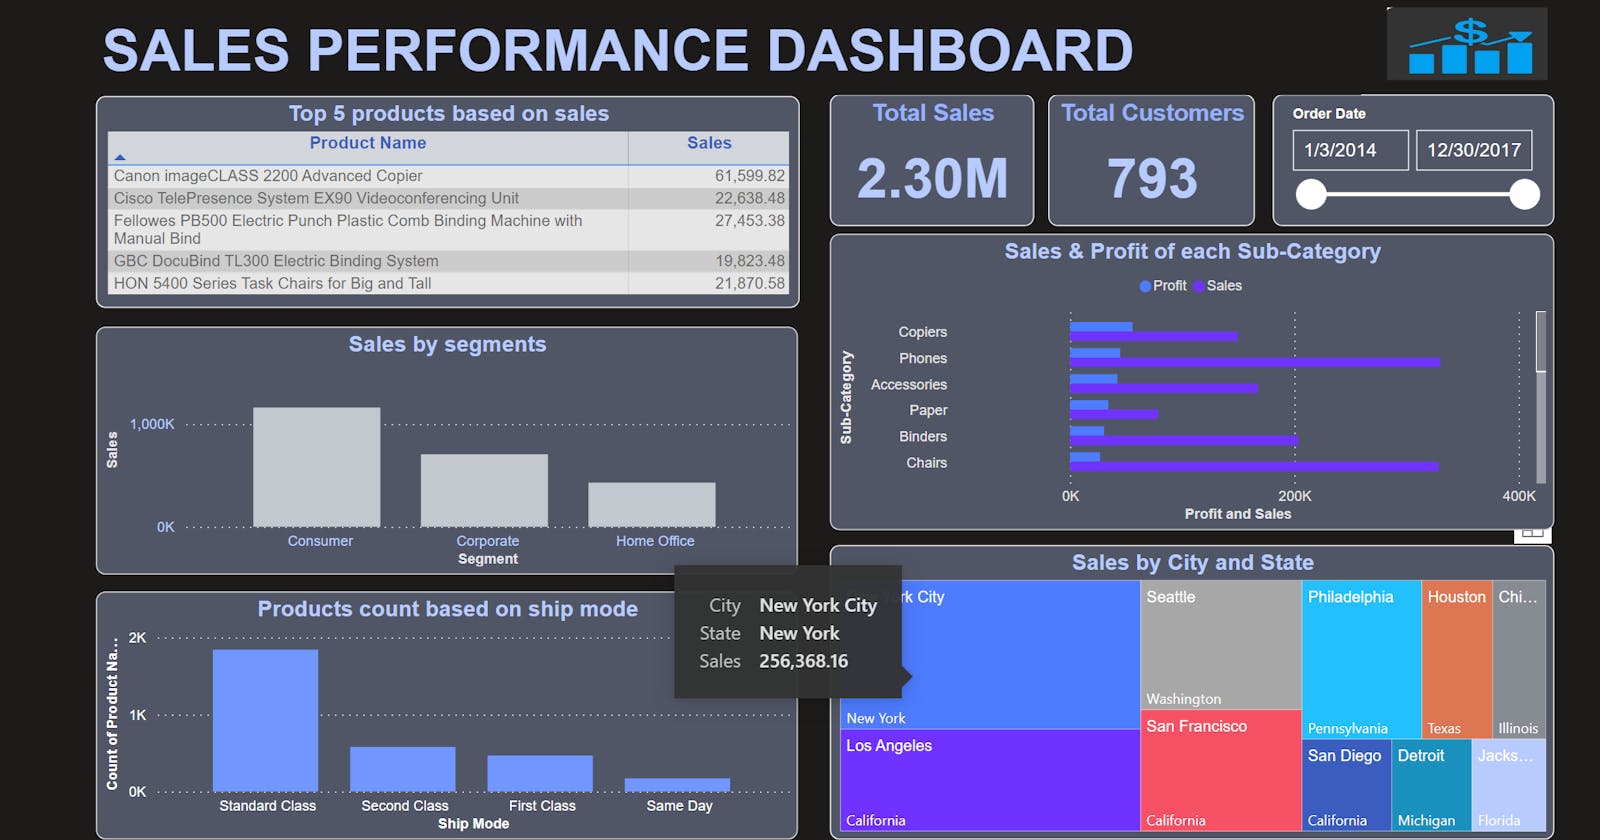 Meet my latest project - Superstore Sales Dashboard